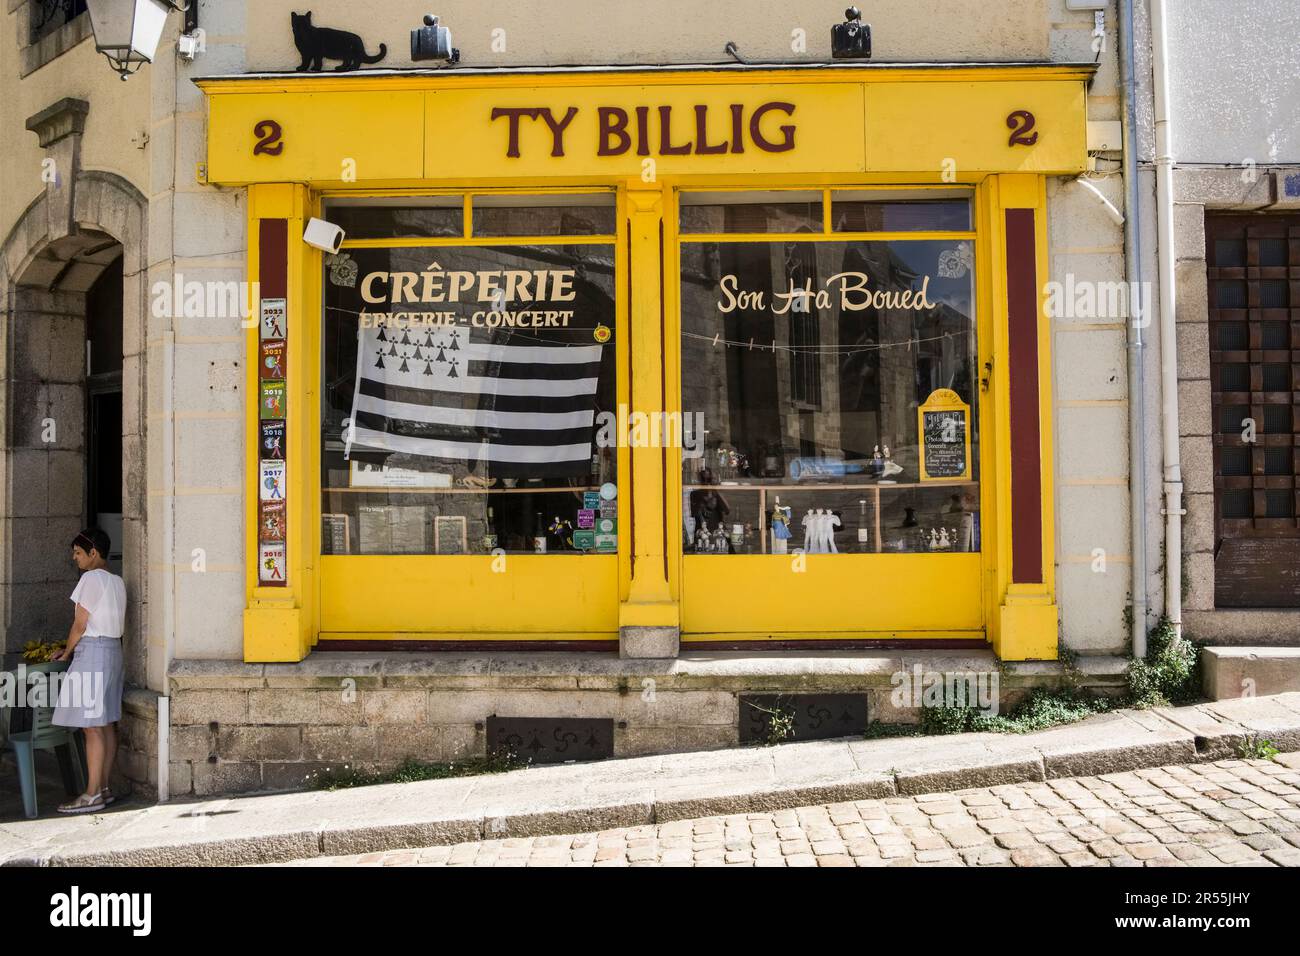 Quimperle (Brittany, north-western France): creperie “crêperie Ty Billig” in the town center Stock Photo